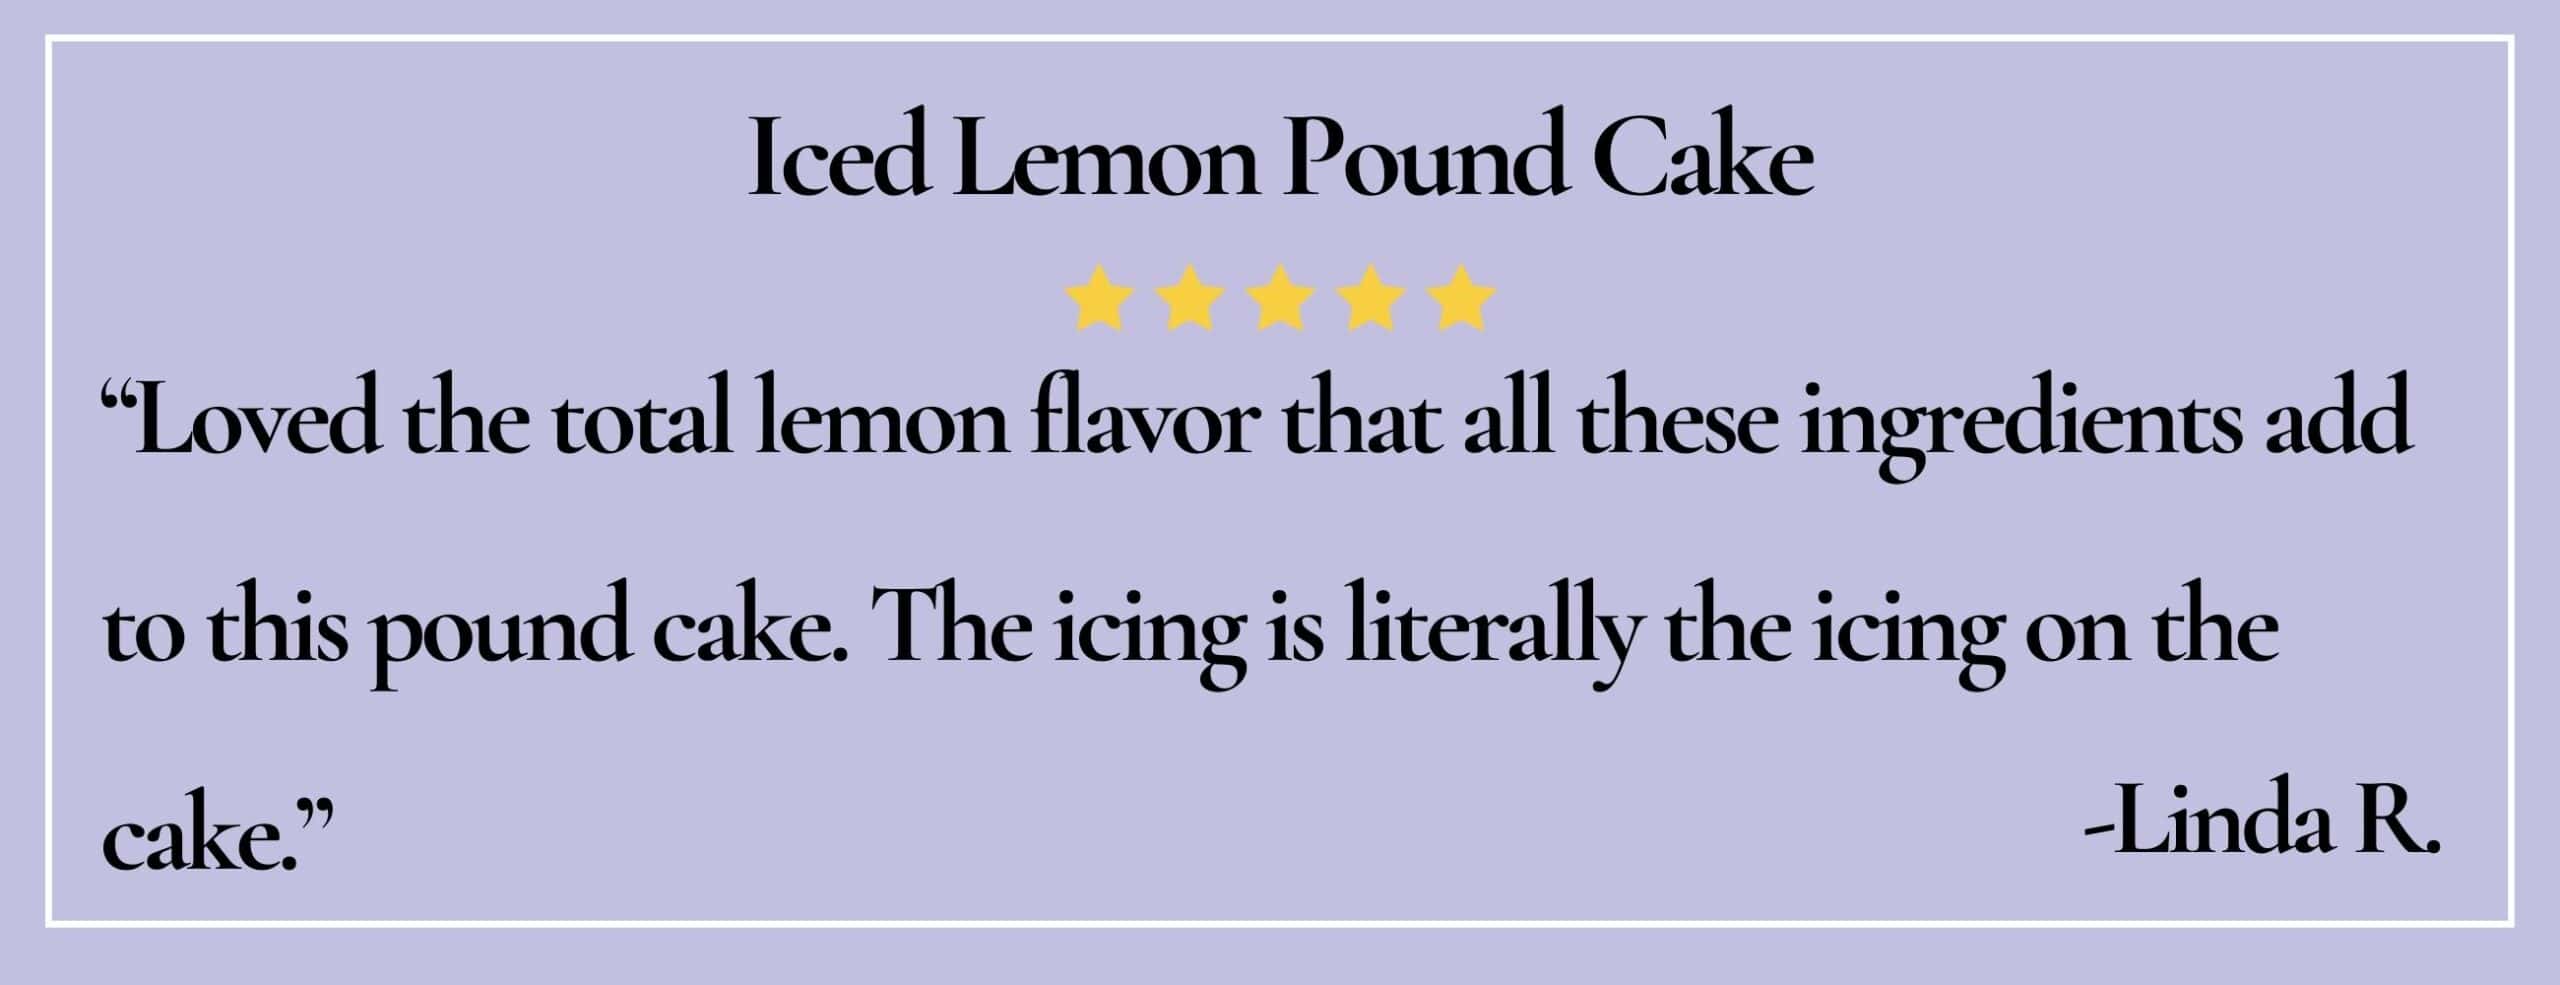 text box with paraphrase: Loved the total lemon flavor that all these ingredients add to this pound cake. -Linda R.